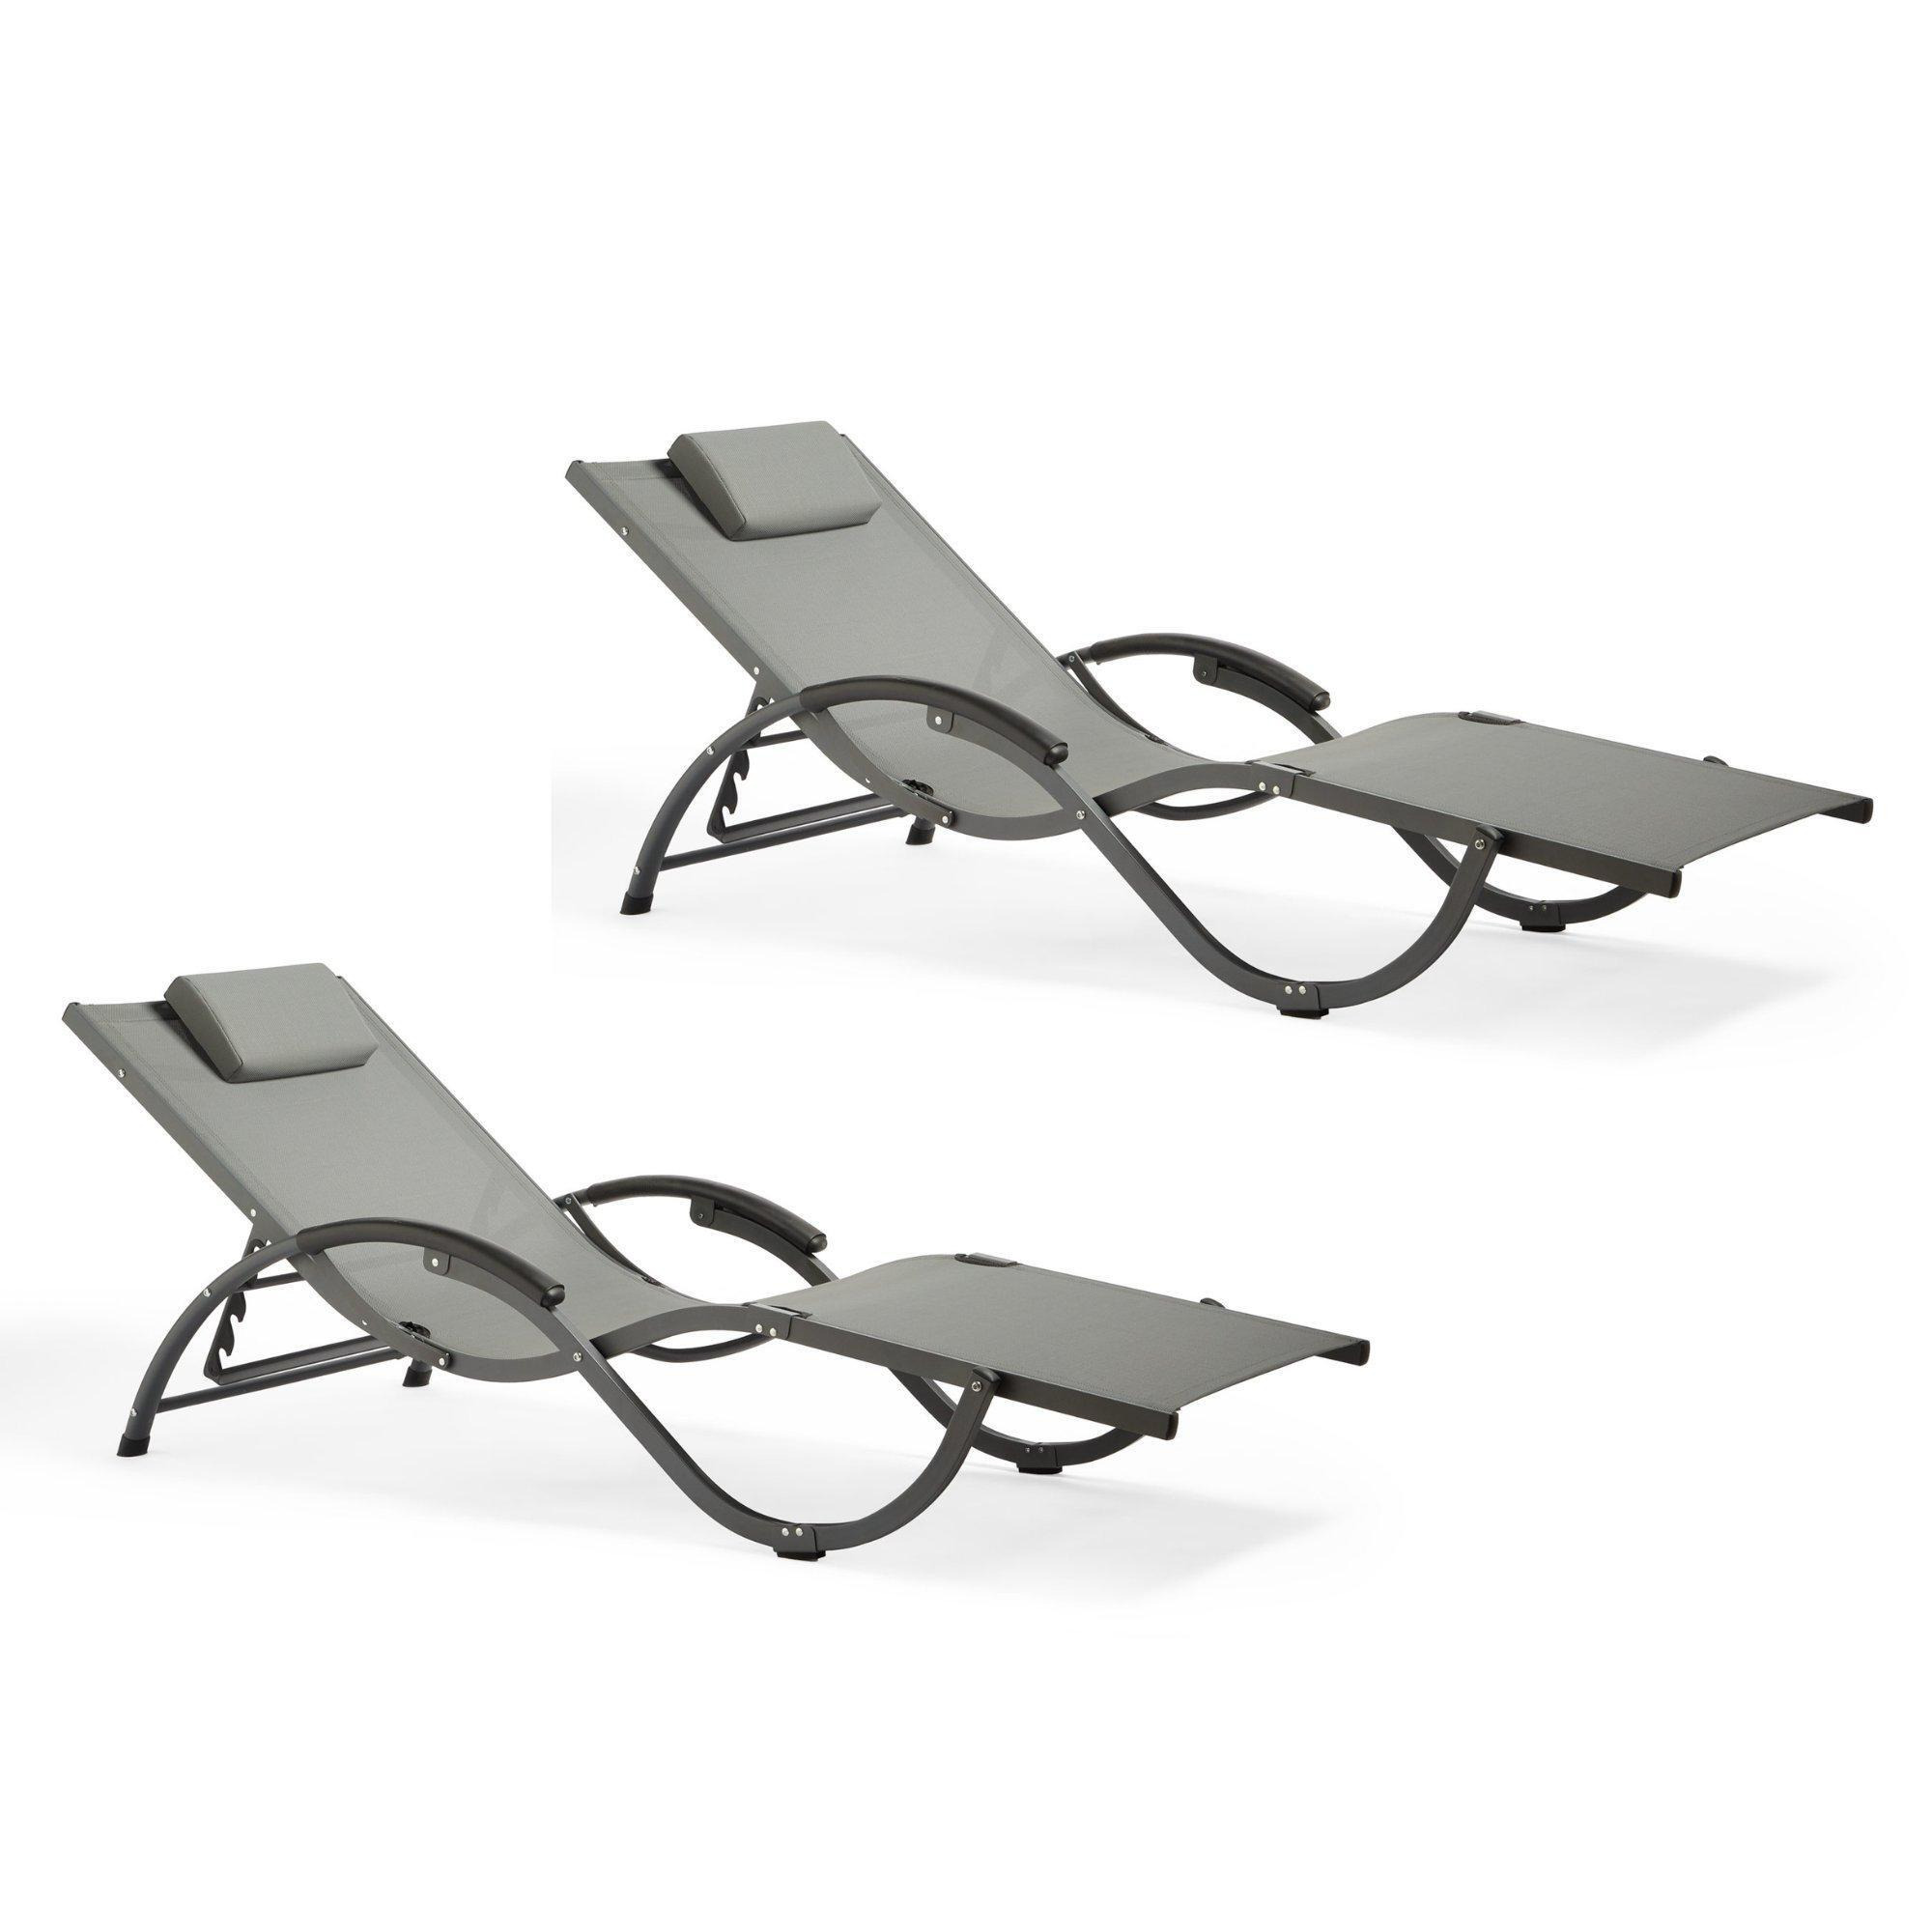 Set of 2 Outdoor Reclinable Textoline Folding Sunloungers - image 1